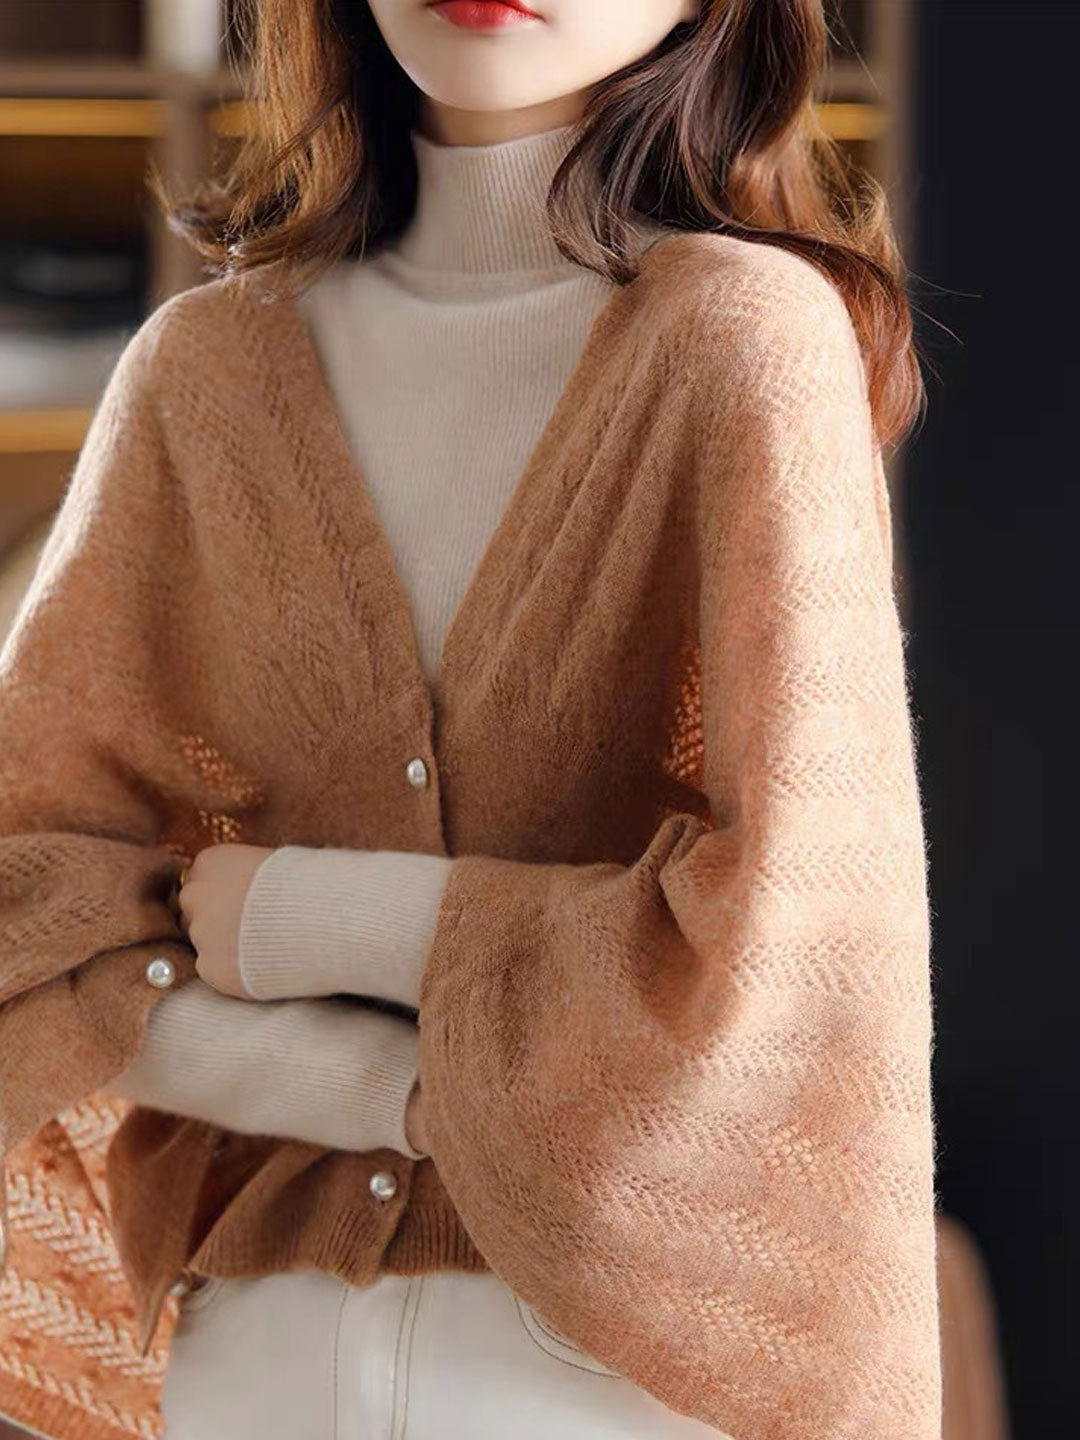 Taylor Hollowed Knitted Scarf Cape Sweater-Camel